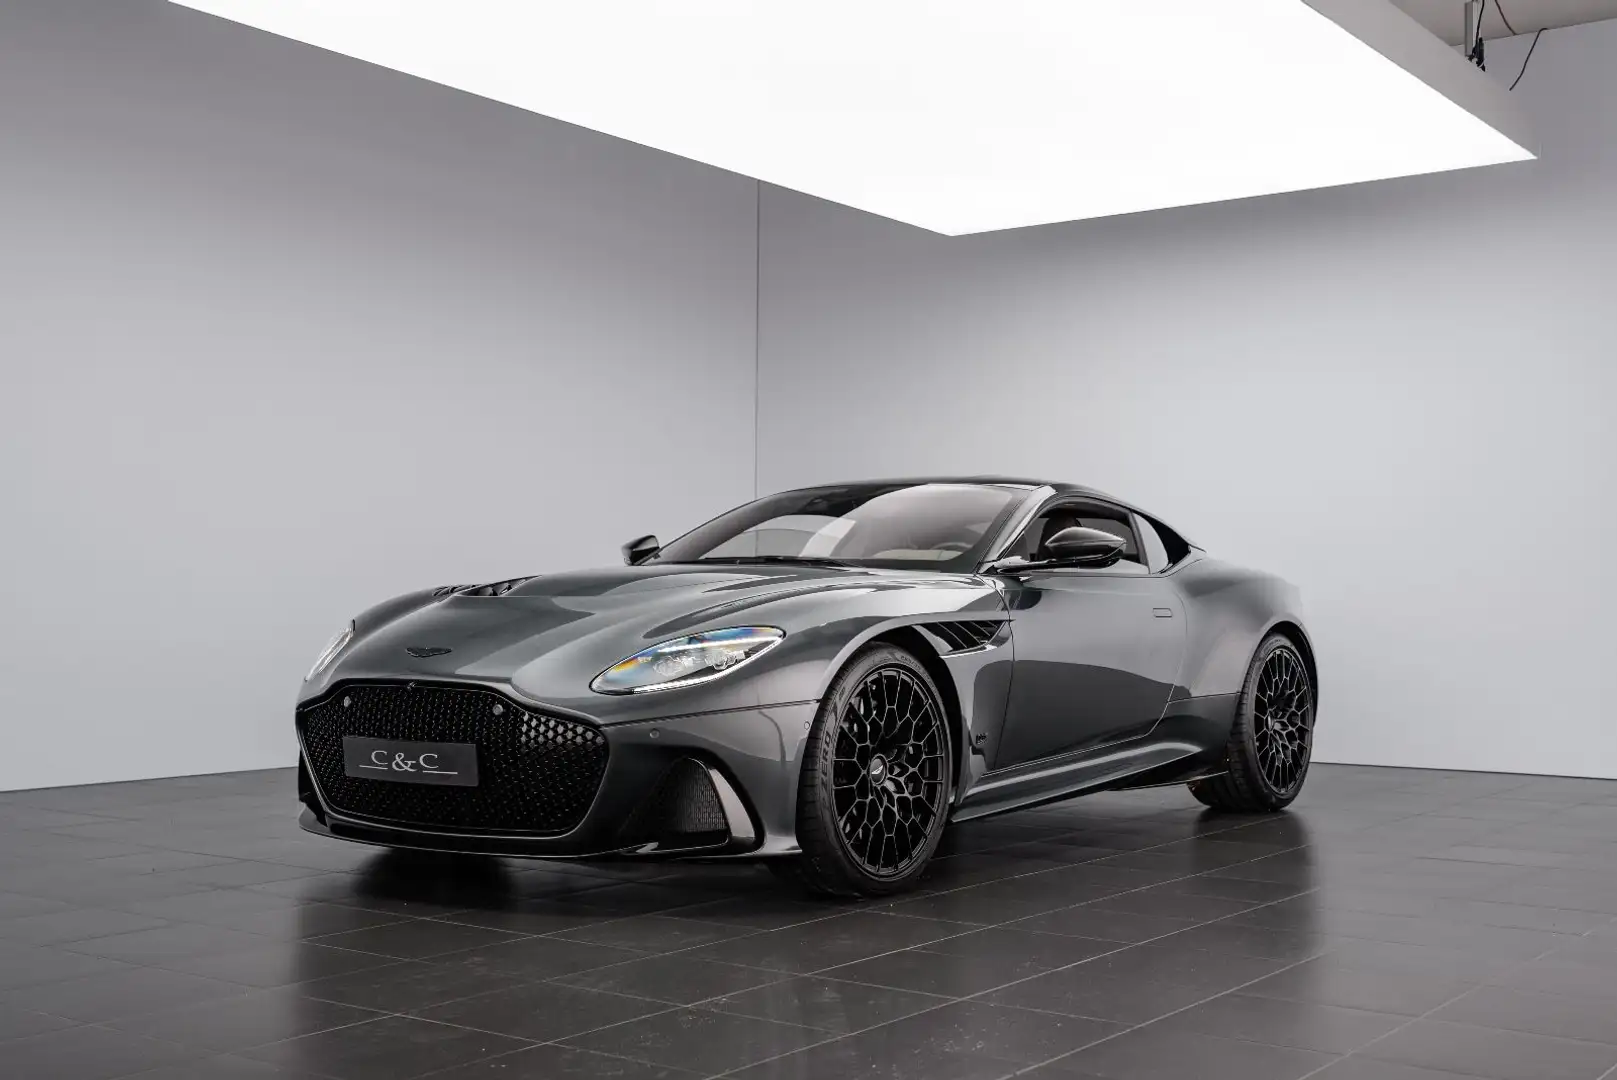 Aston Martin DBS 770 Ultimate 1 OF 300/FULL CARBON Grey - 1